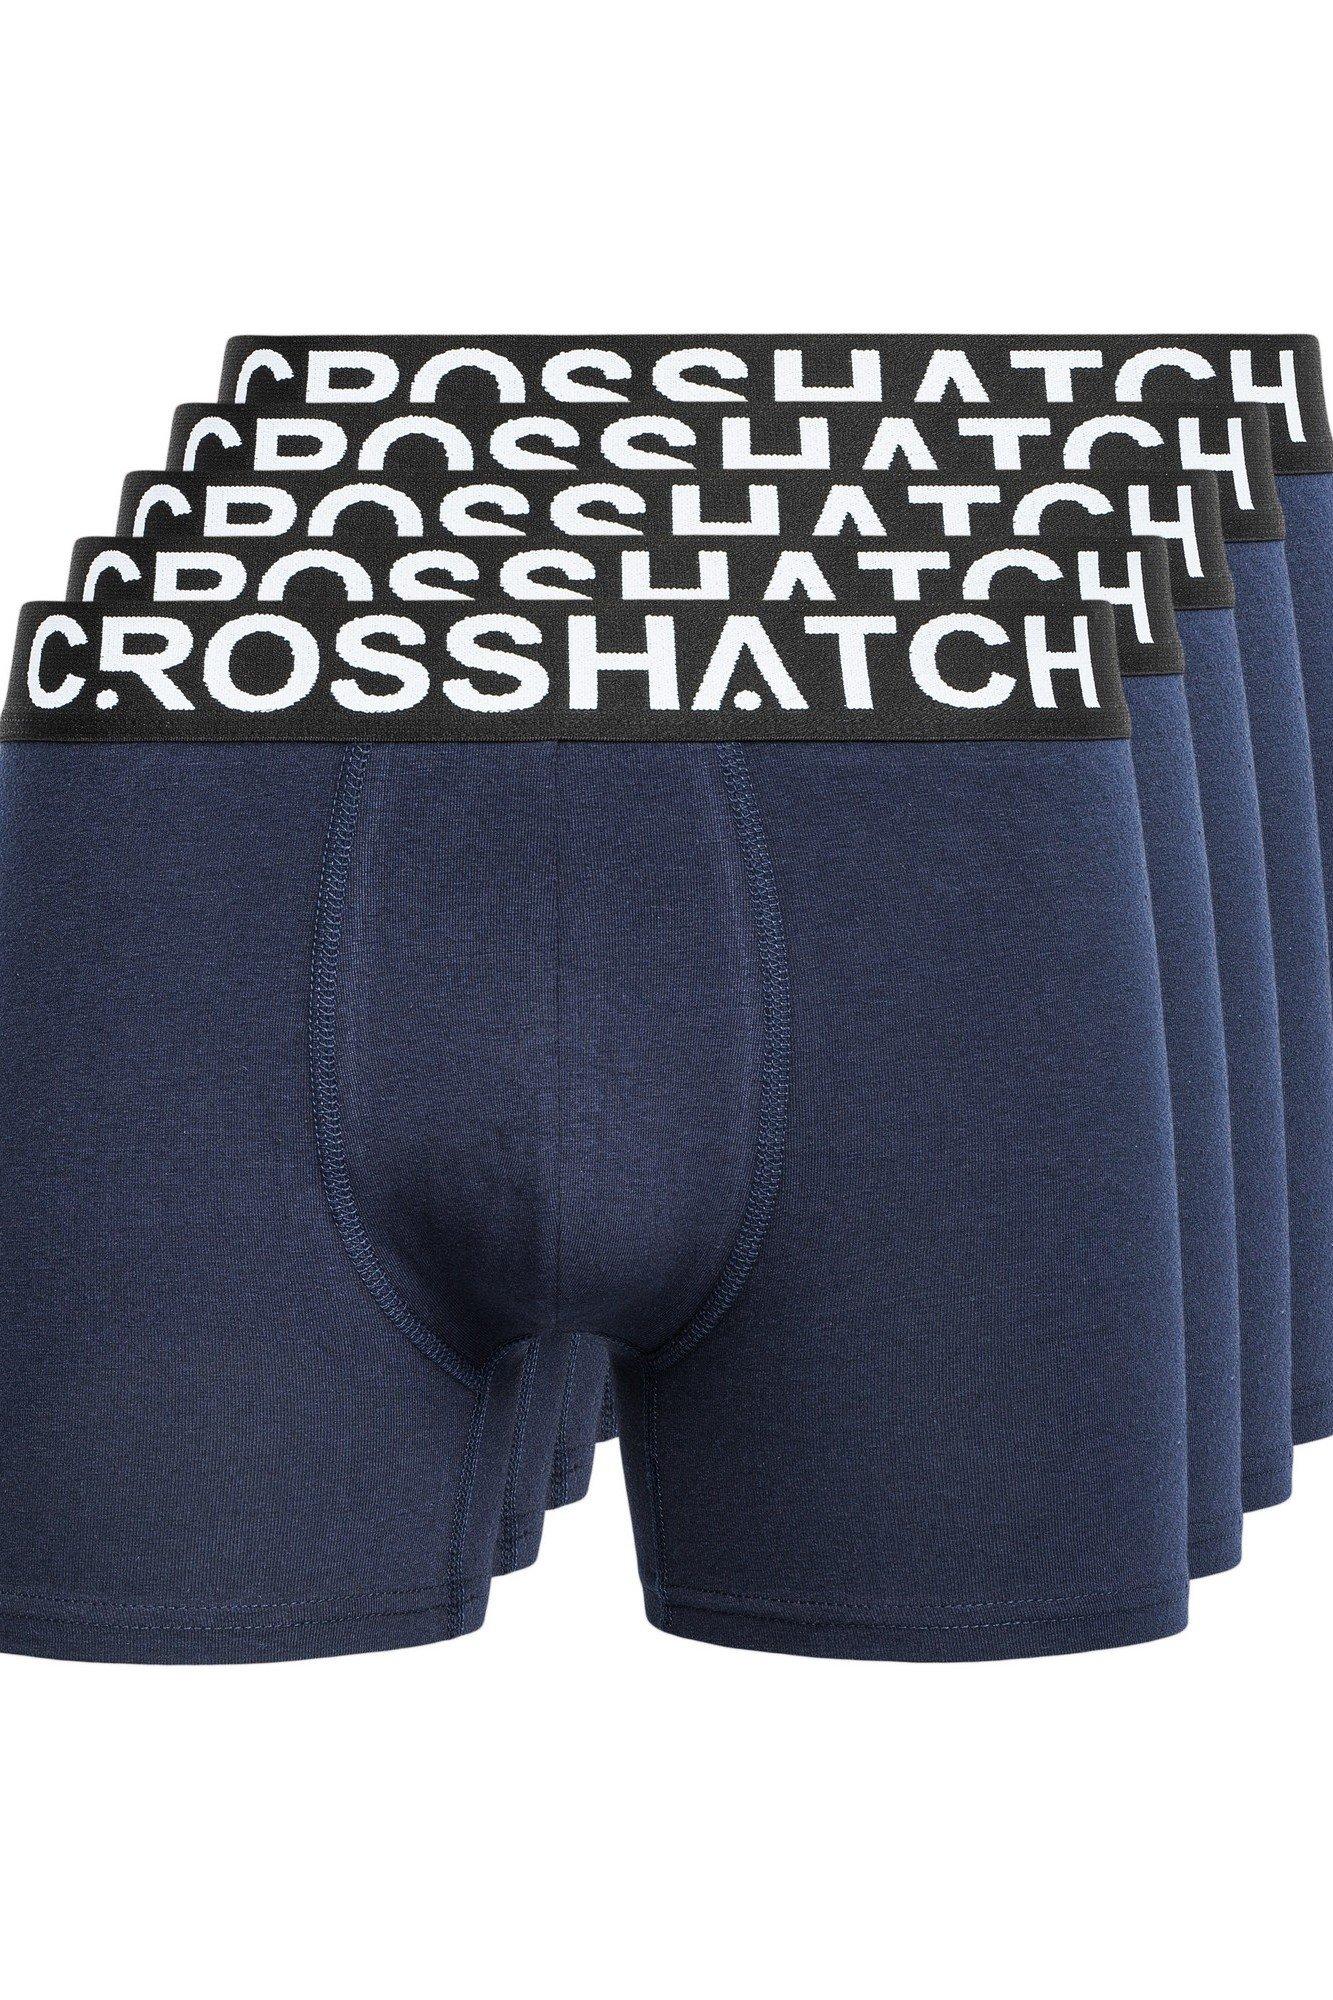 Astral Boxer Shorts (Pack of 5)